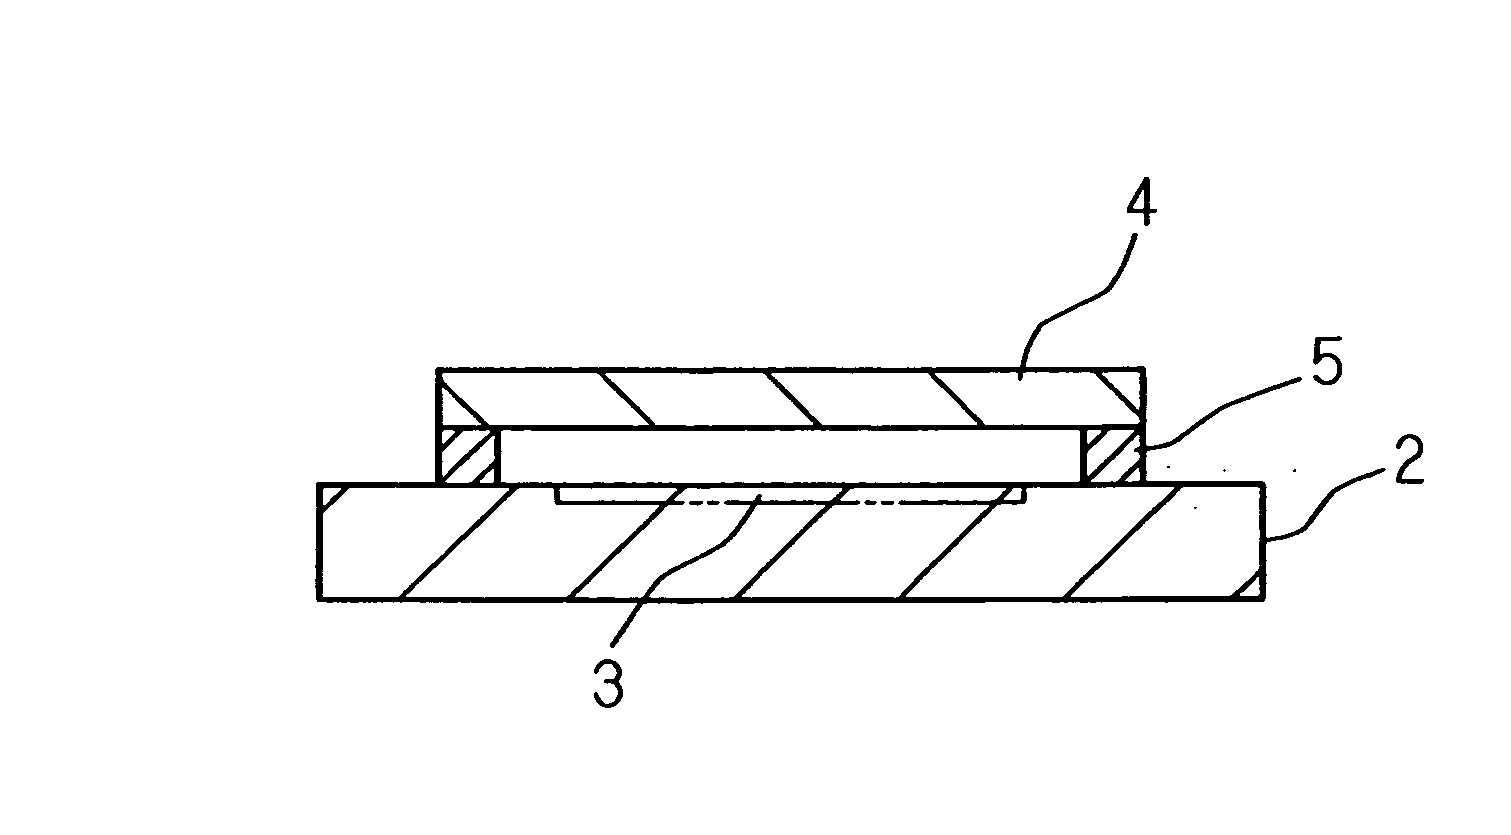 Solid state imaging device, semiconductor wafer, optical device module, method of solid state imaging device fabrication, and method of optical device module fabrication